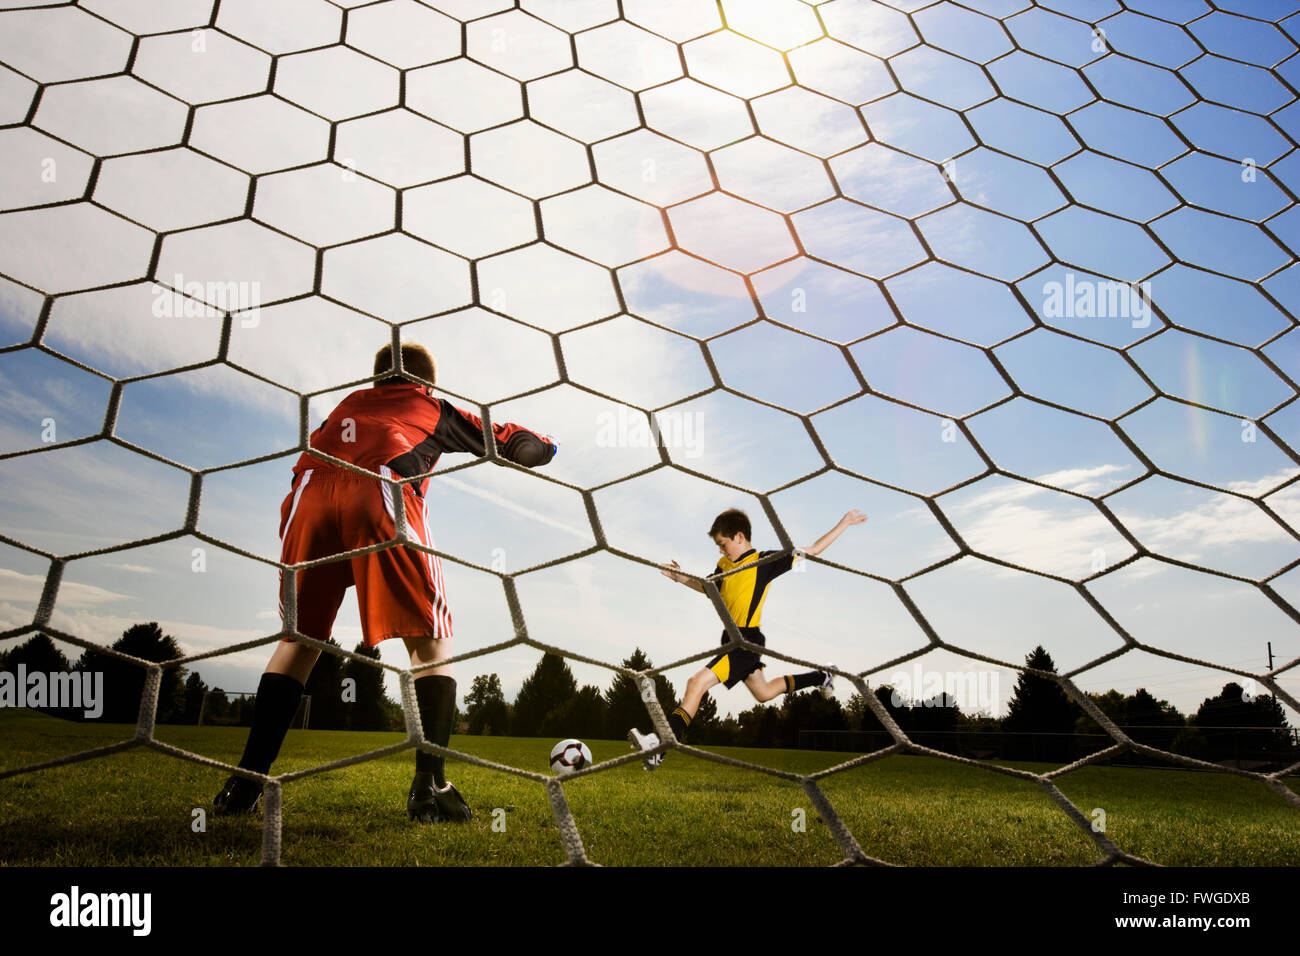 A soccer player taking aim and kicking at the goal, view from behind the goal keeper. Stock Photo